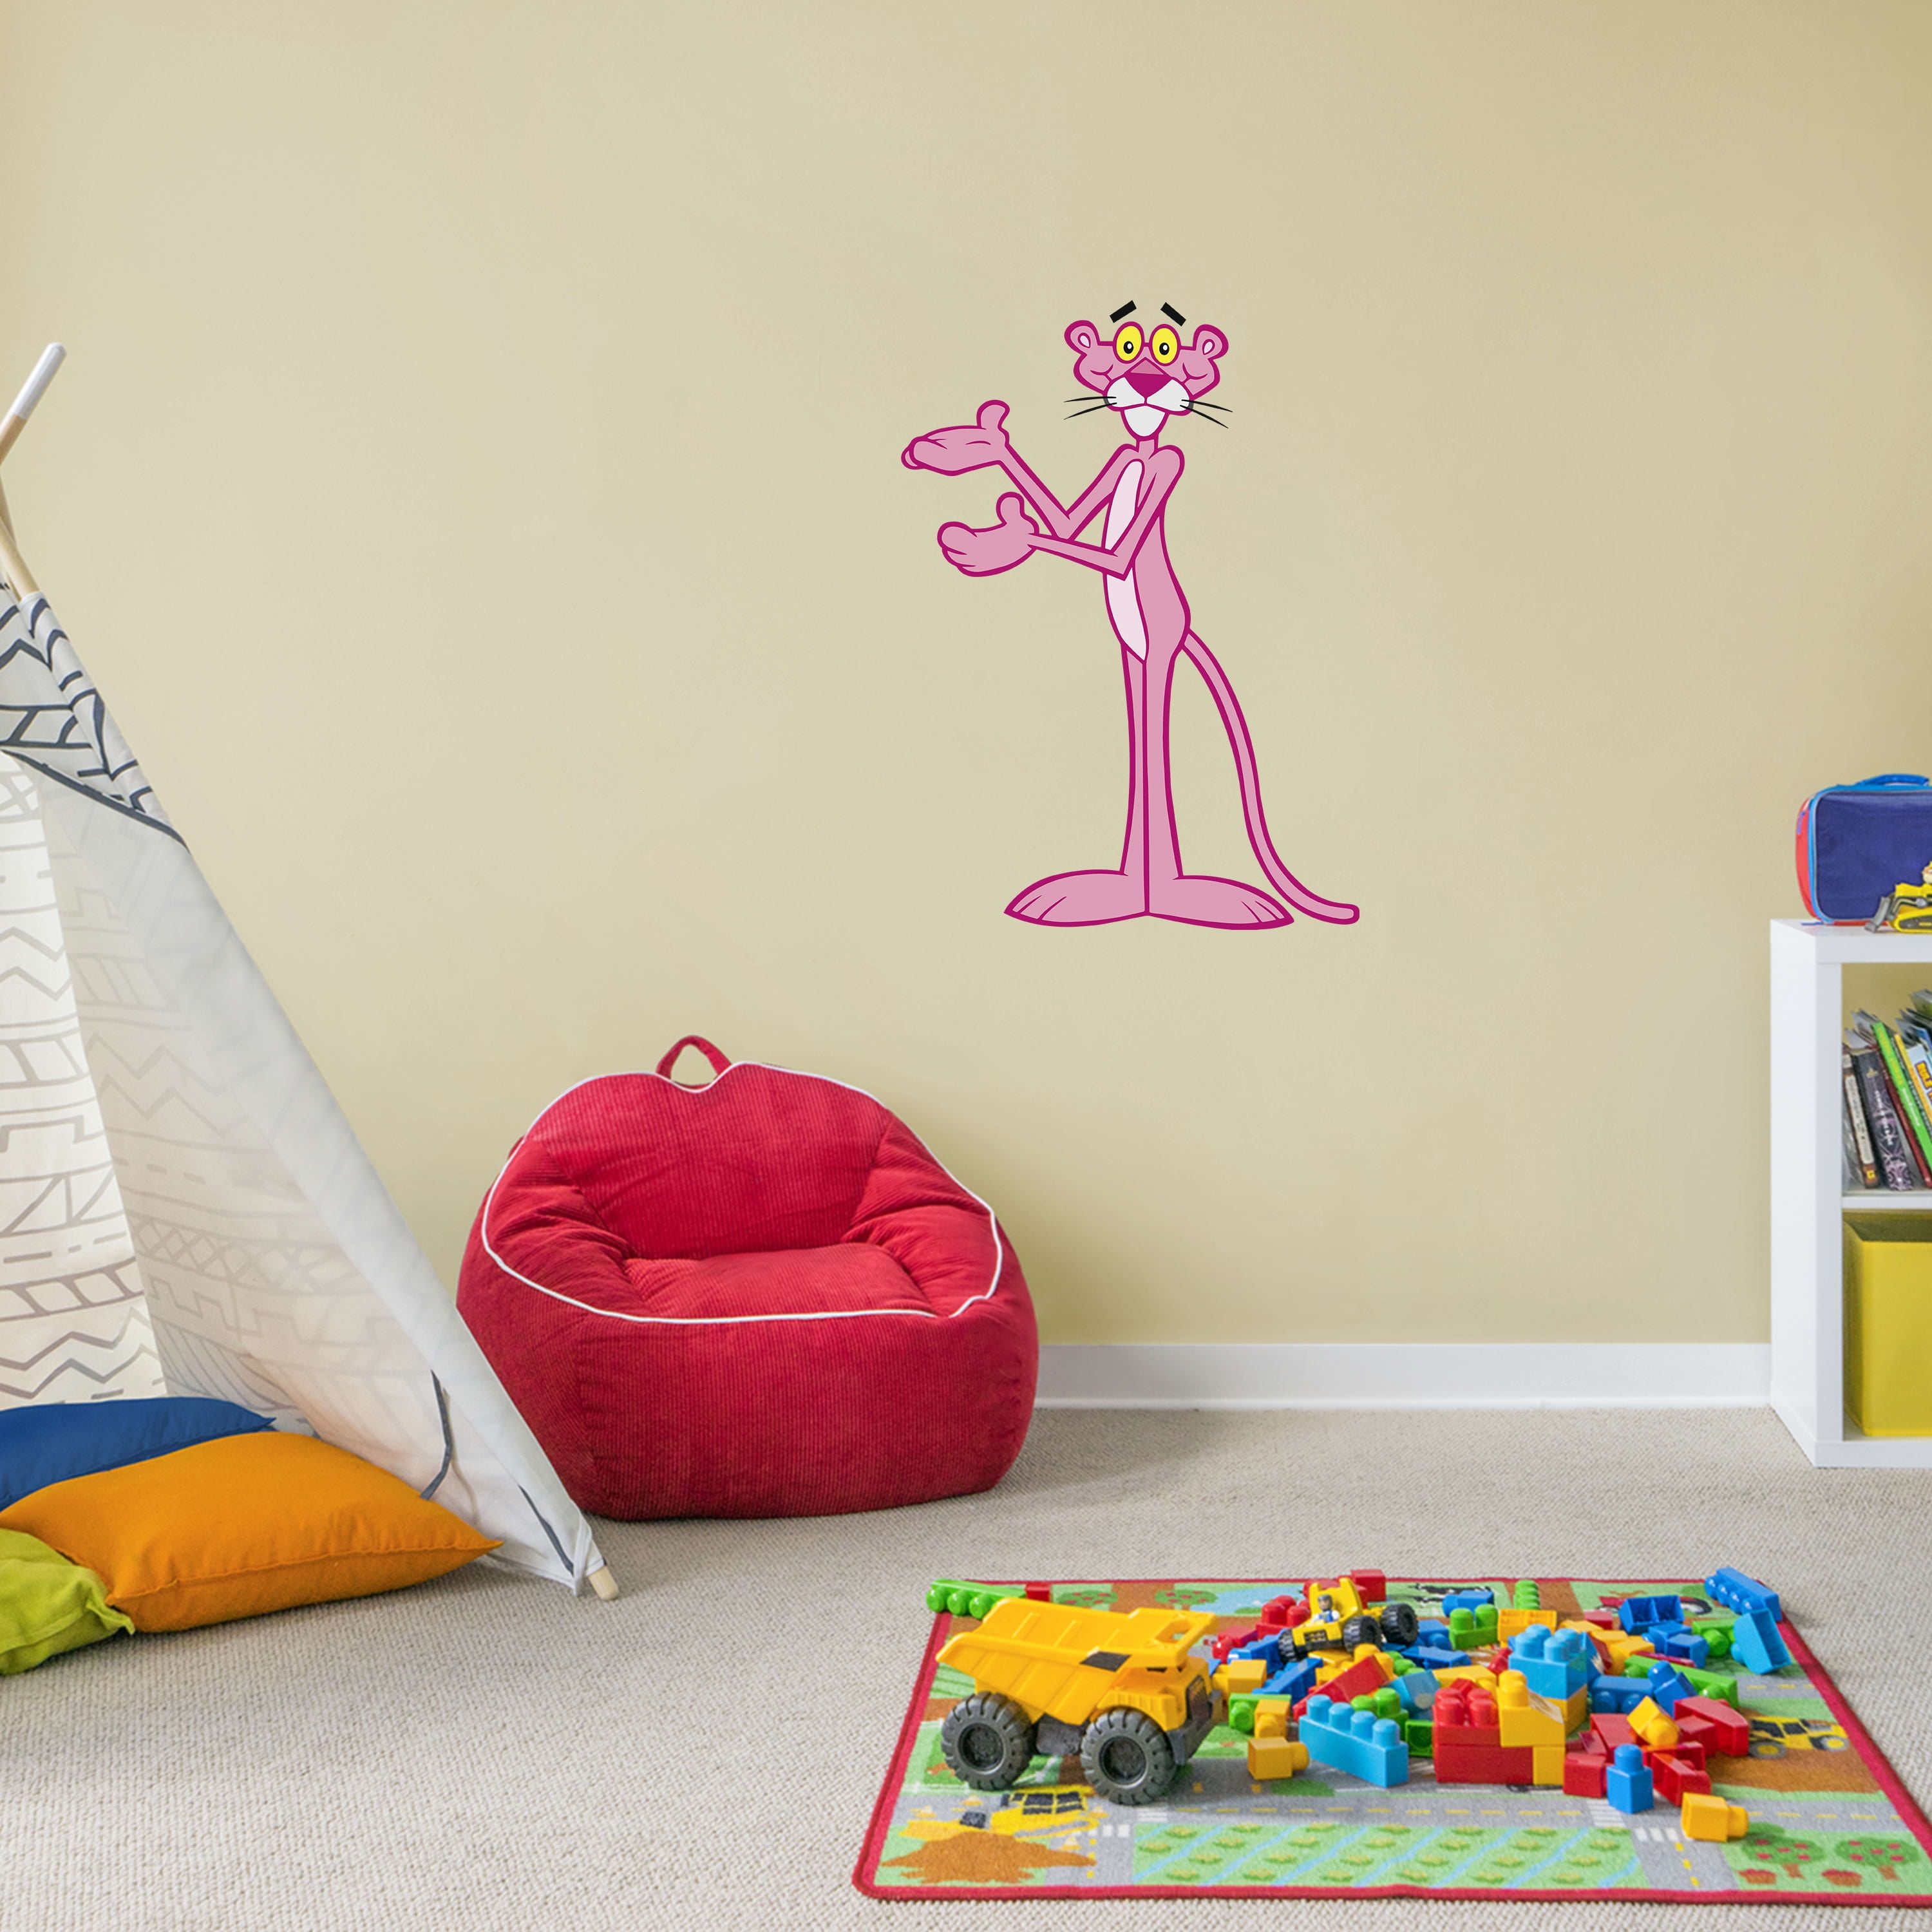 Pink Panther Cartoon Characters Wall Art Decal Vinyl Sticker Kids Bedroom  Infant Baby Room Durable Waterproof High Quality Sticker Decal Adhesive  Removable Waterproof Peel and Stick Design 40x20 inch 